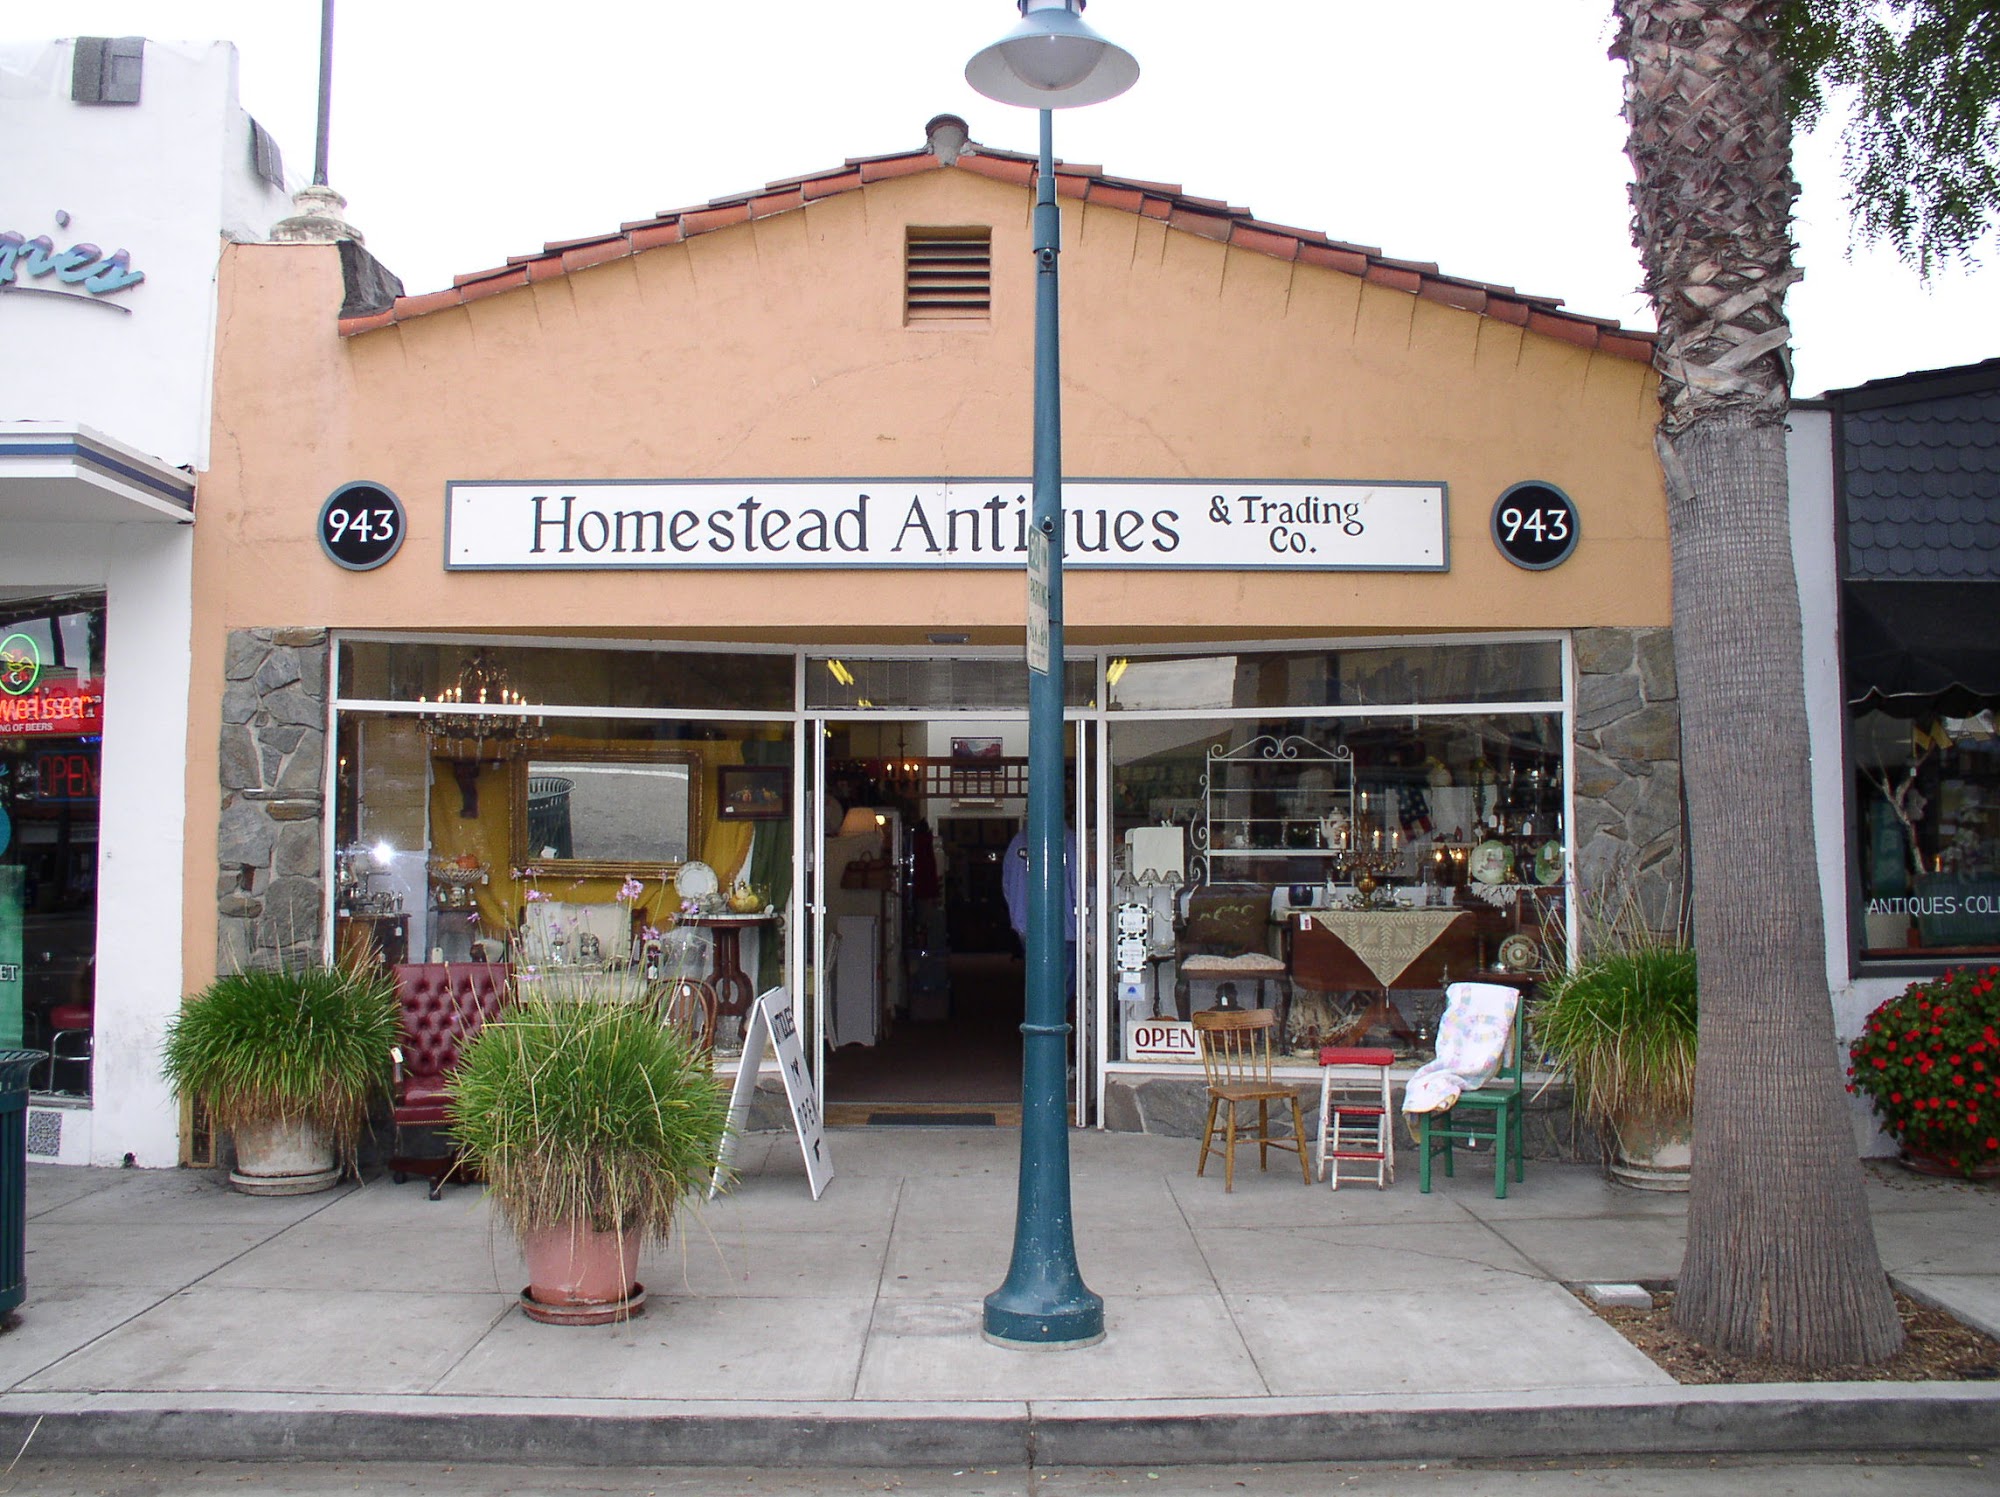 Homestead Antiques & Trading Co.